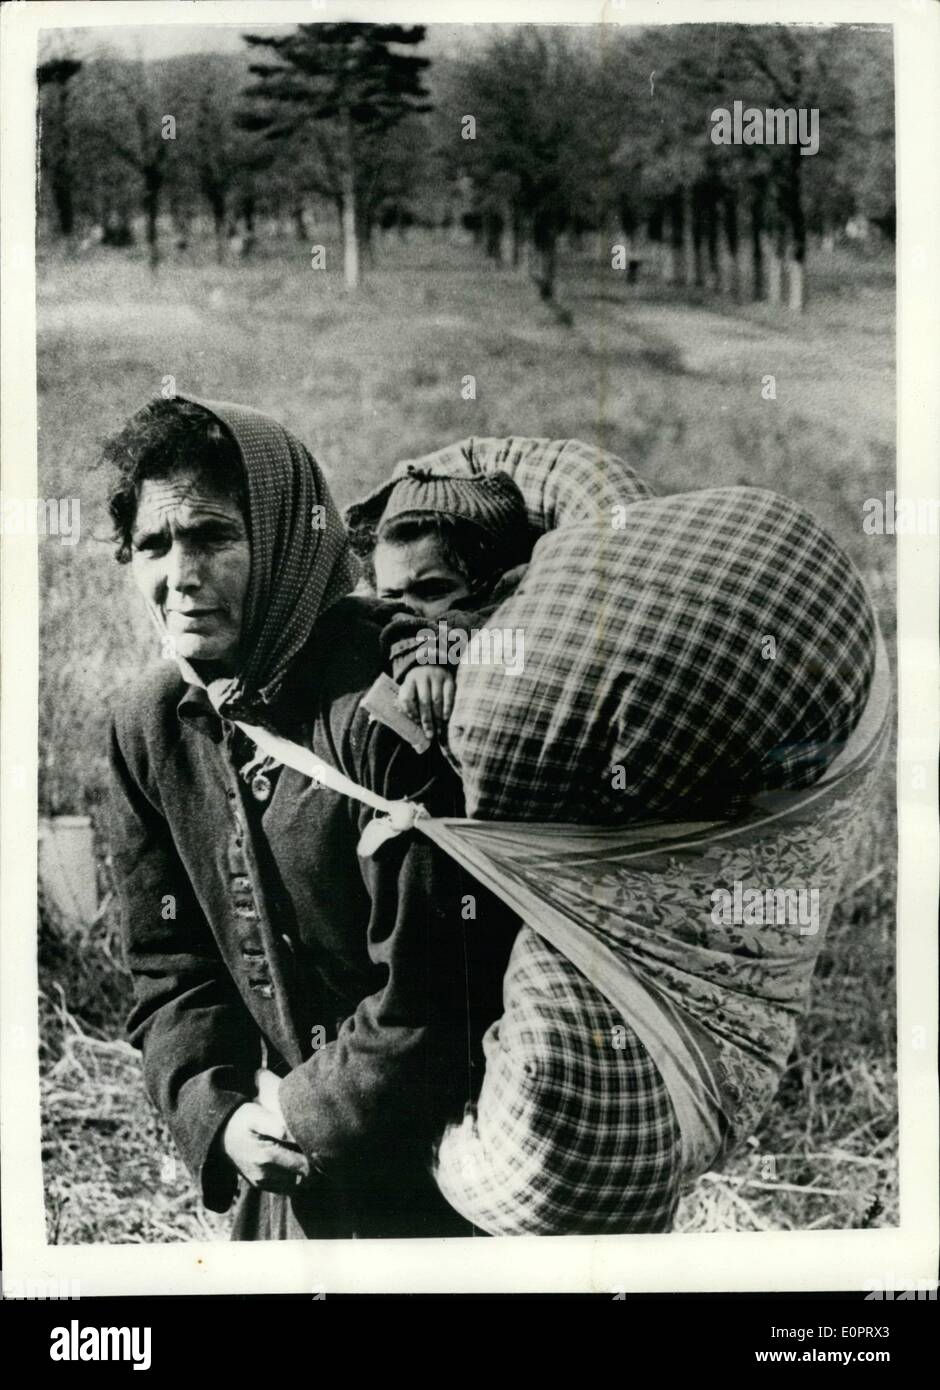 Nov. 11, 1956 - Hungarian refugees arrive in Austria. Photo shows with grief and tiredness marked on her face this Hungarian woman who rescued her child by carrying it on her back on the flight from Hungary into Austria is pictured on arrival at the Traiskirchen Camp in Austria. Stock Photo